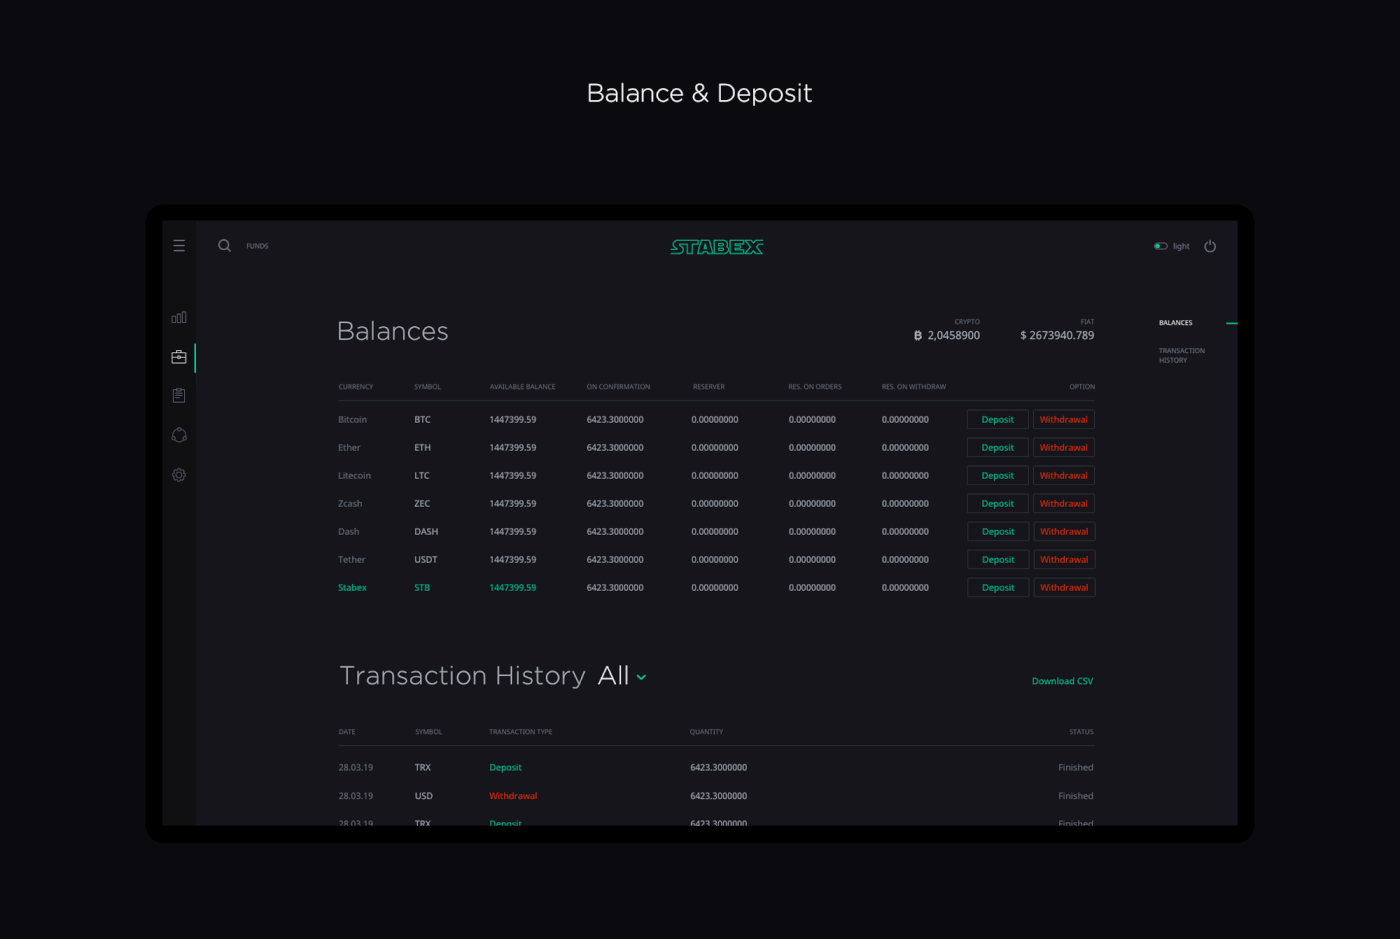 ux UI Interface dashboard Website mobile crypto cryptocurrency exchange